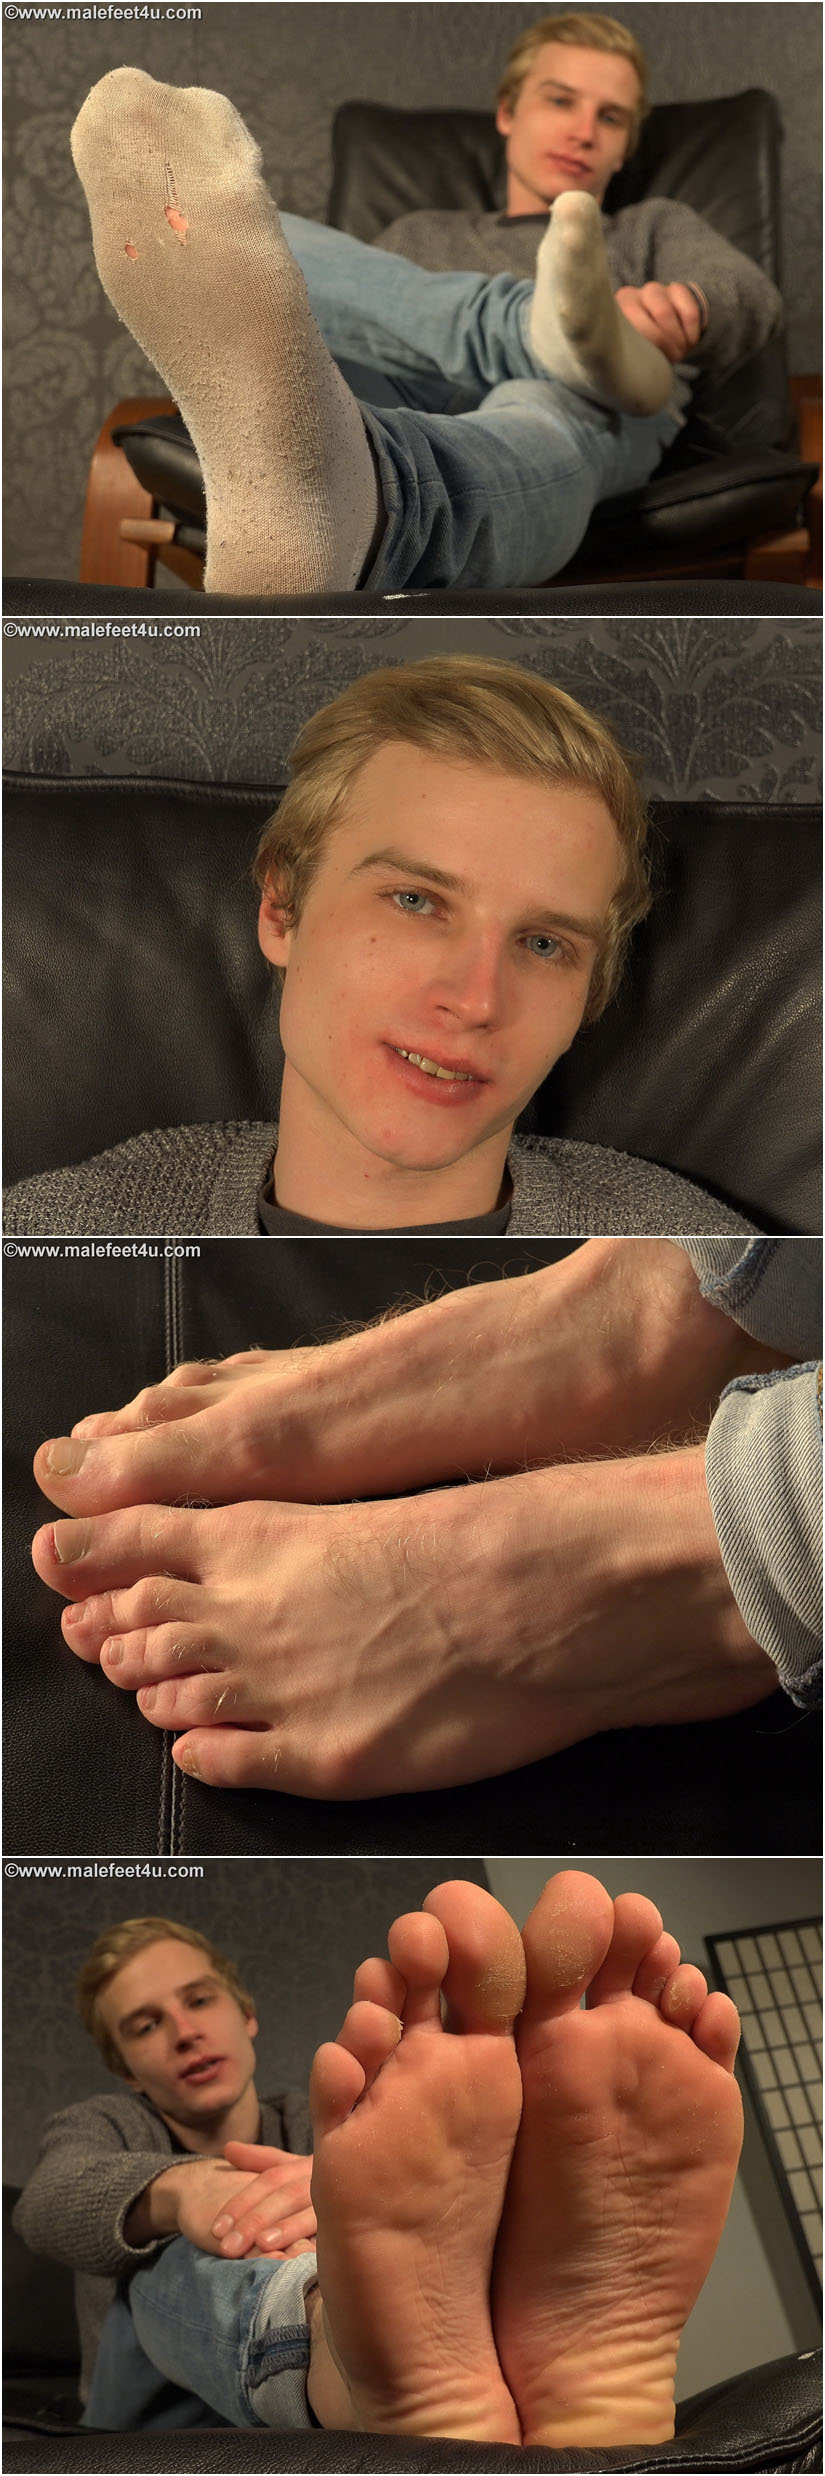 European twink with sexy feet in holey, dirty socks